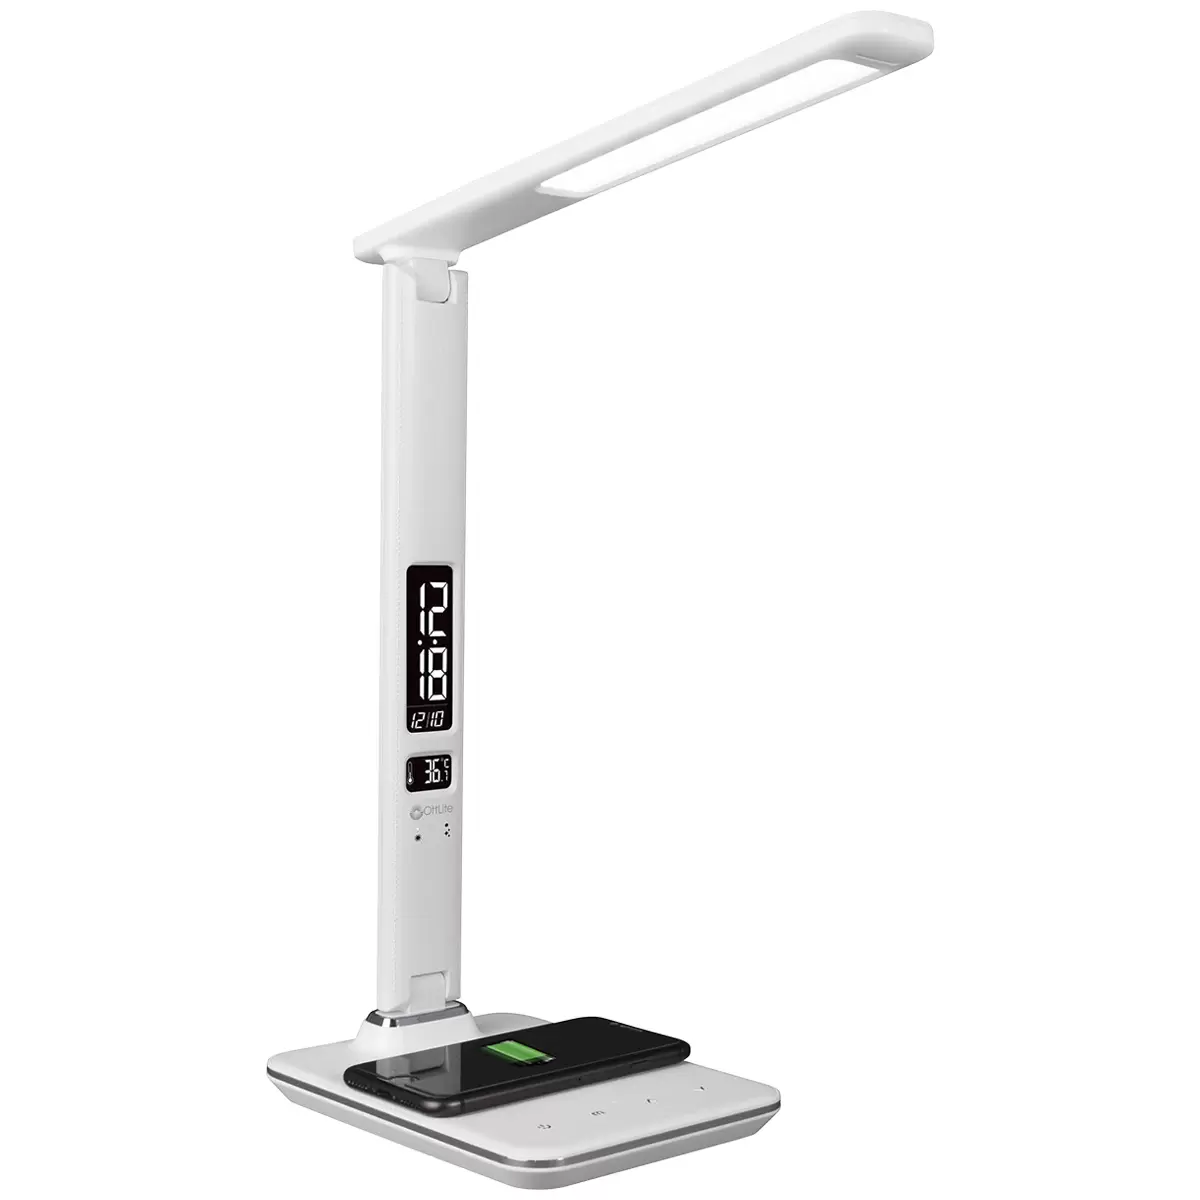 Ottlite Executive Desk Lamp with Wireless Charger and Sanitiser